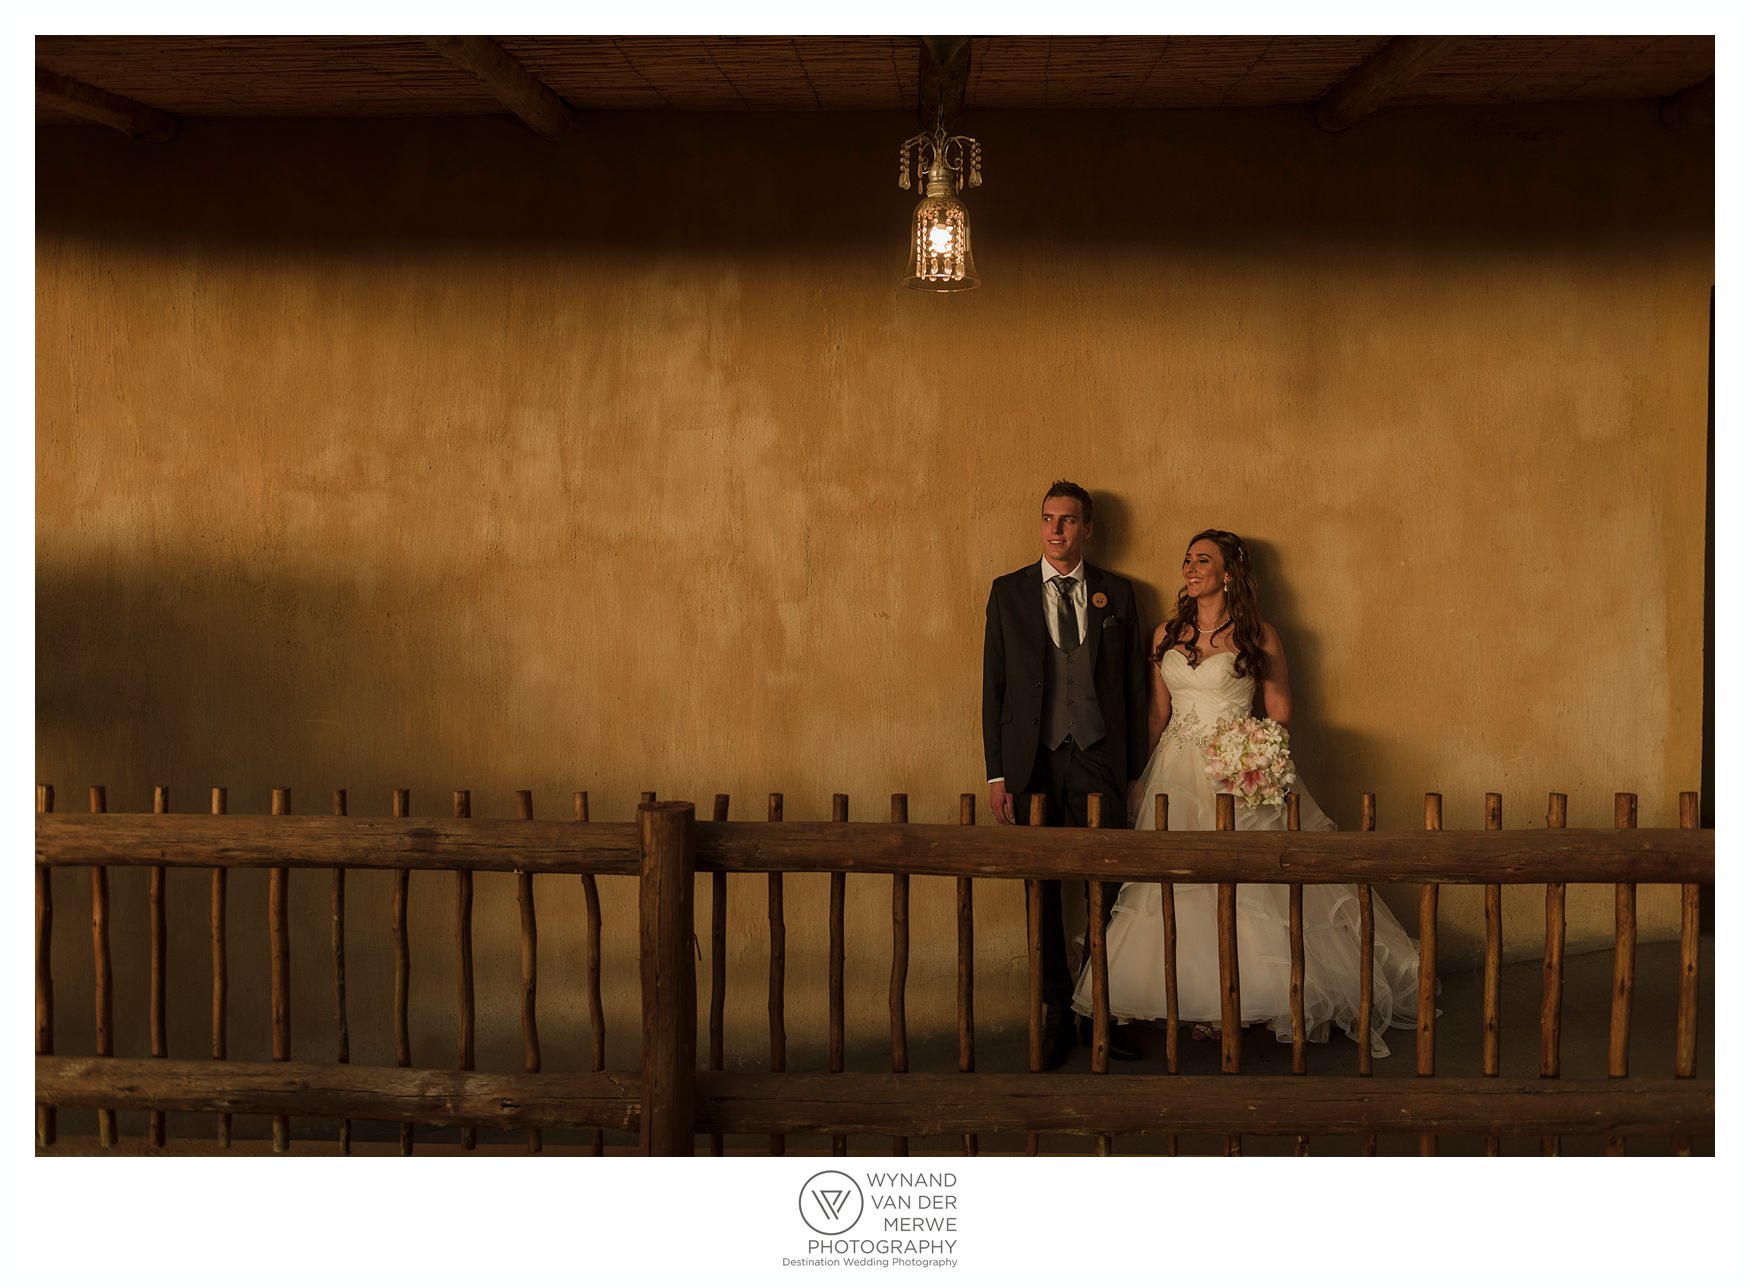 Ryan and Natalie's wedding at Cradle Valley Guesthouse